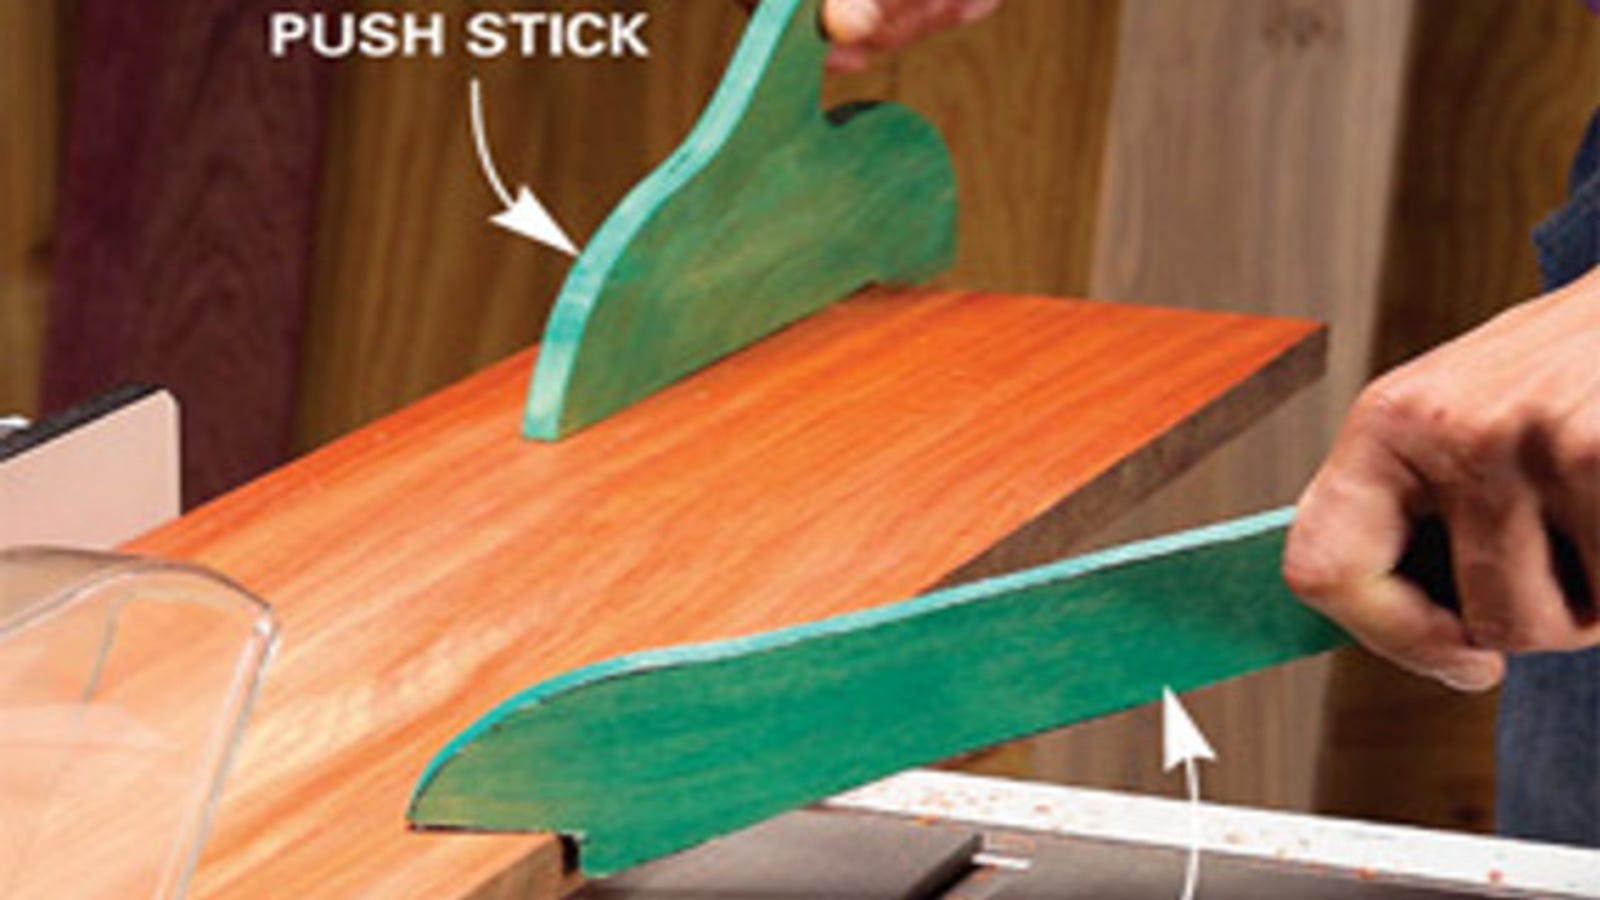 DIY Push Sticks Provide Extra Safety When Using a Table Saw